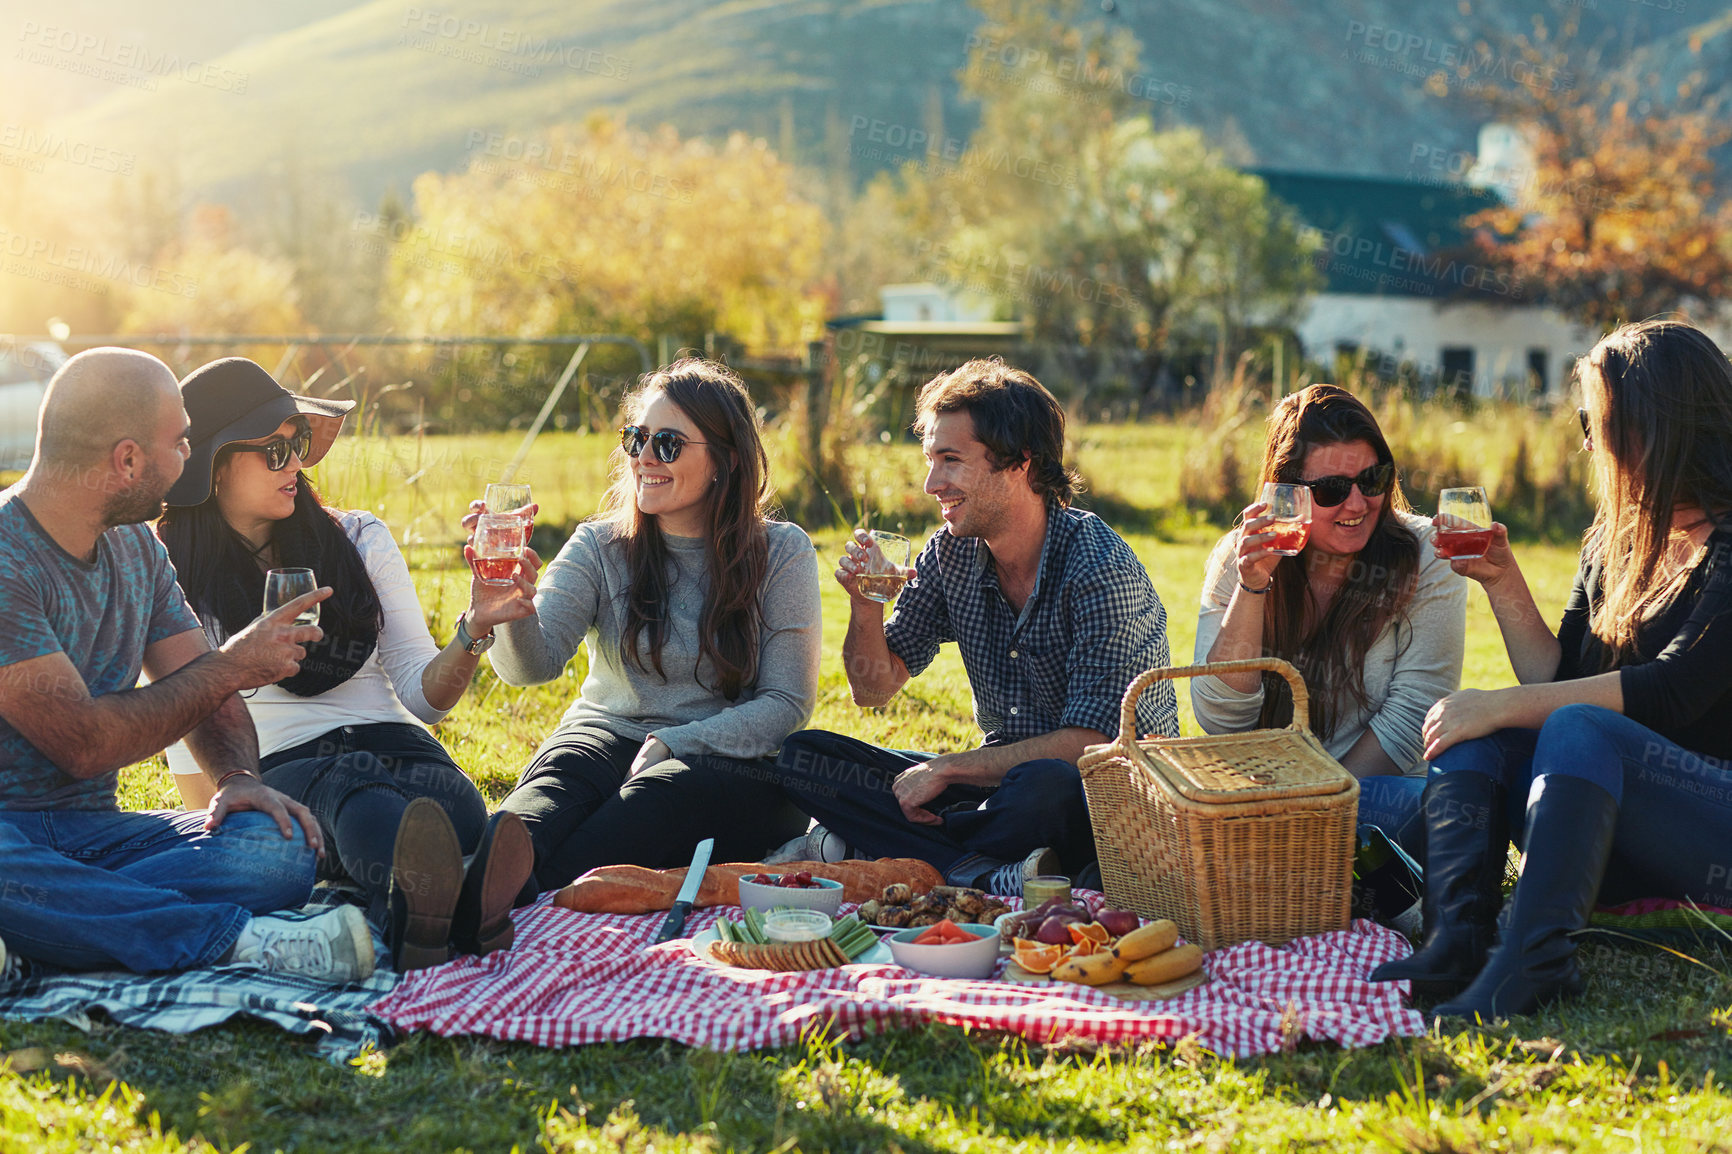 Buy stock photo Shot of a group of friends having a picnic together outdoors